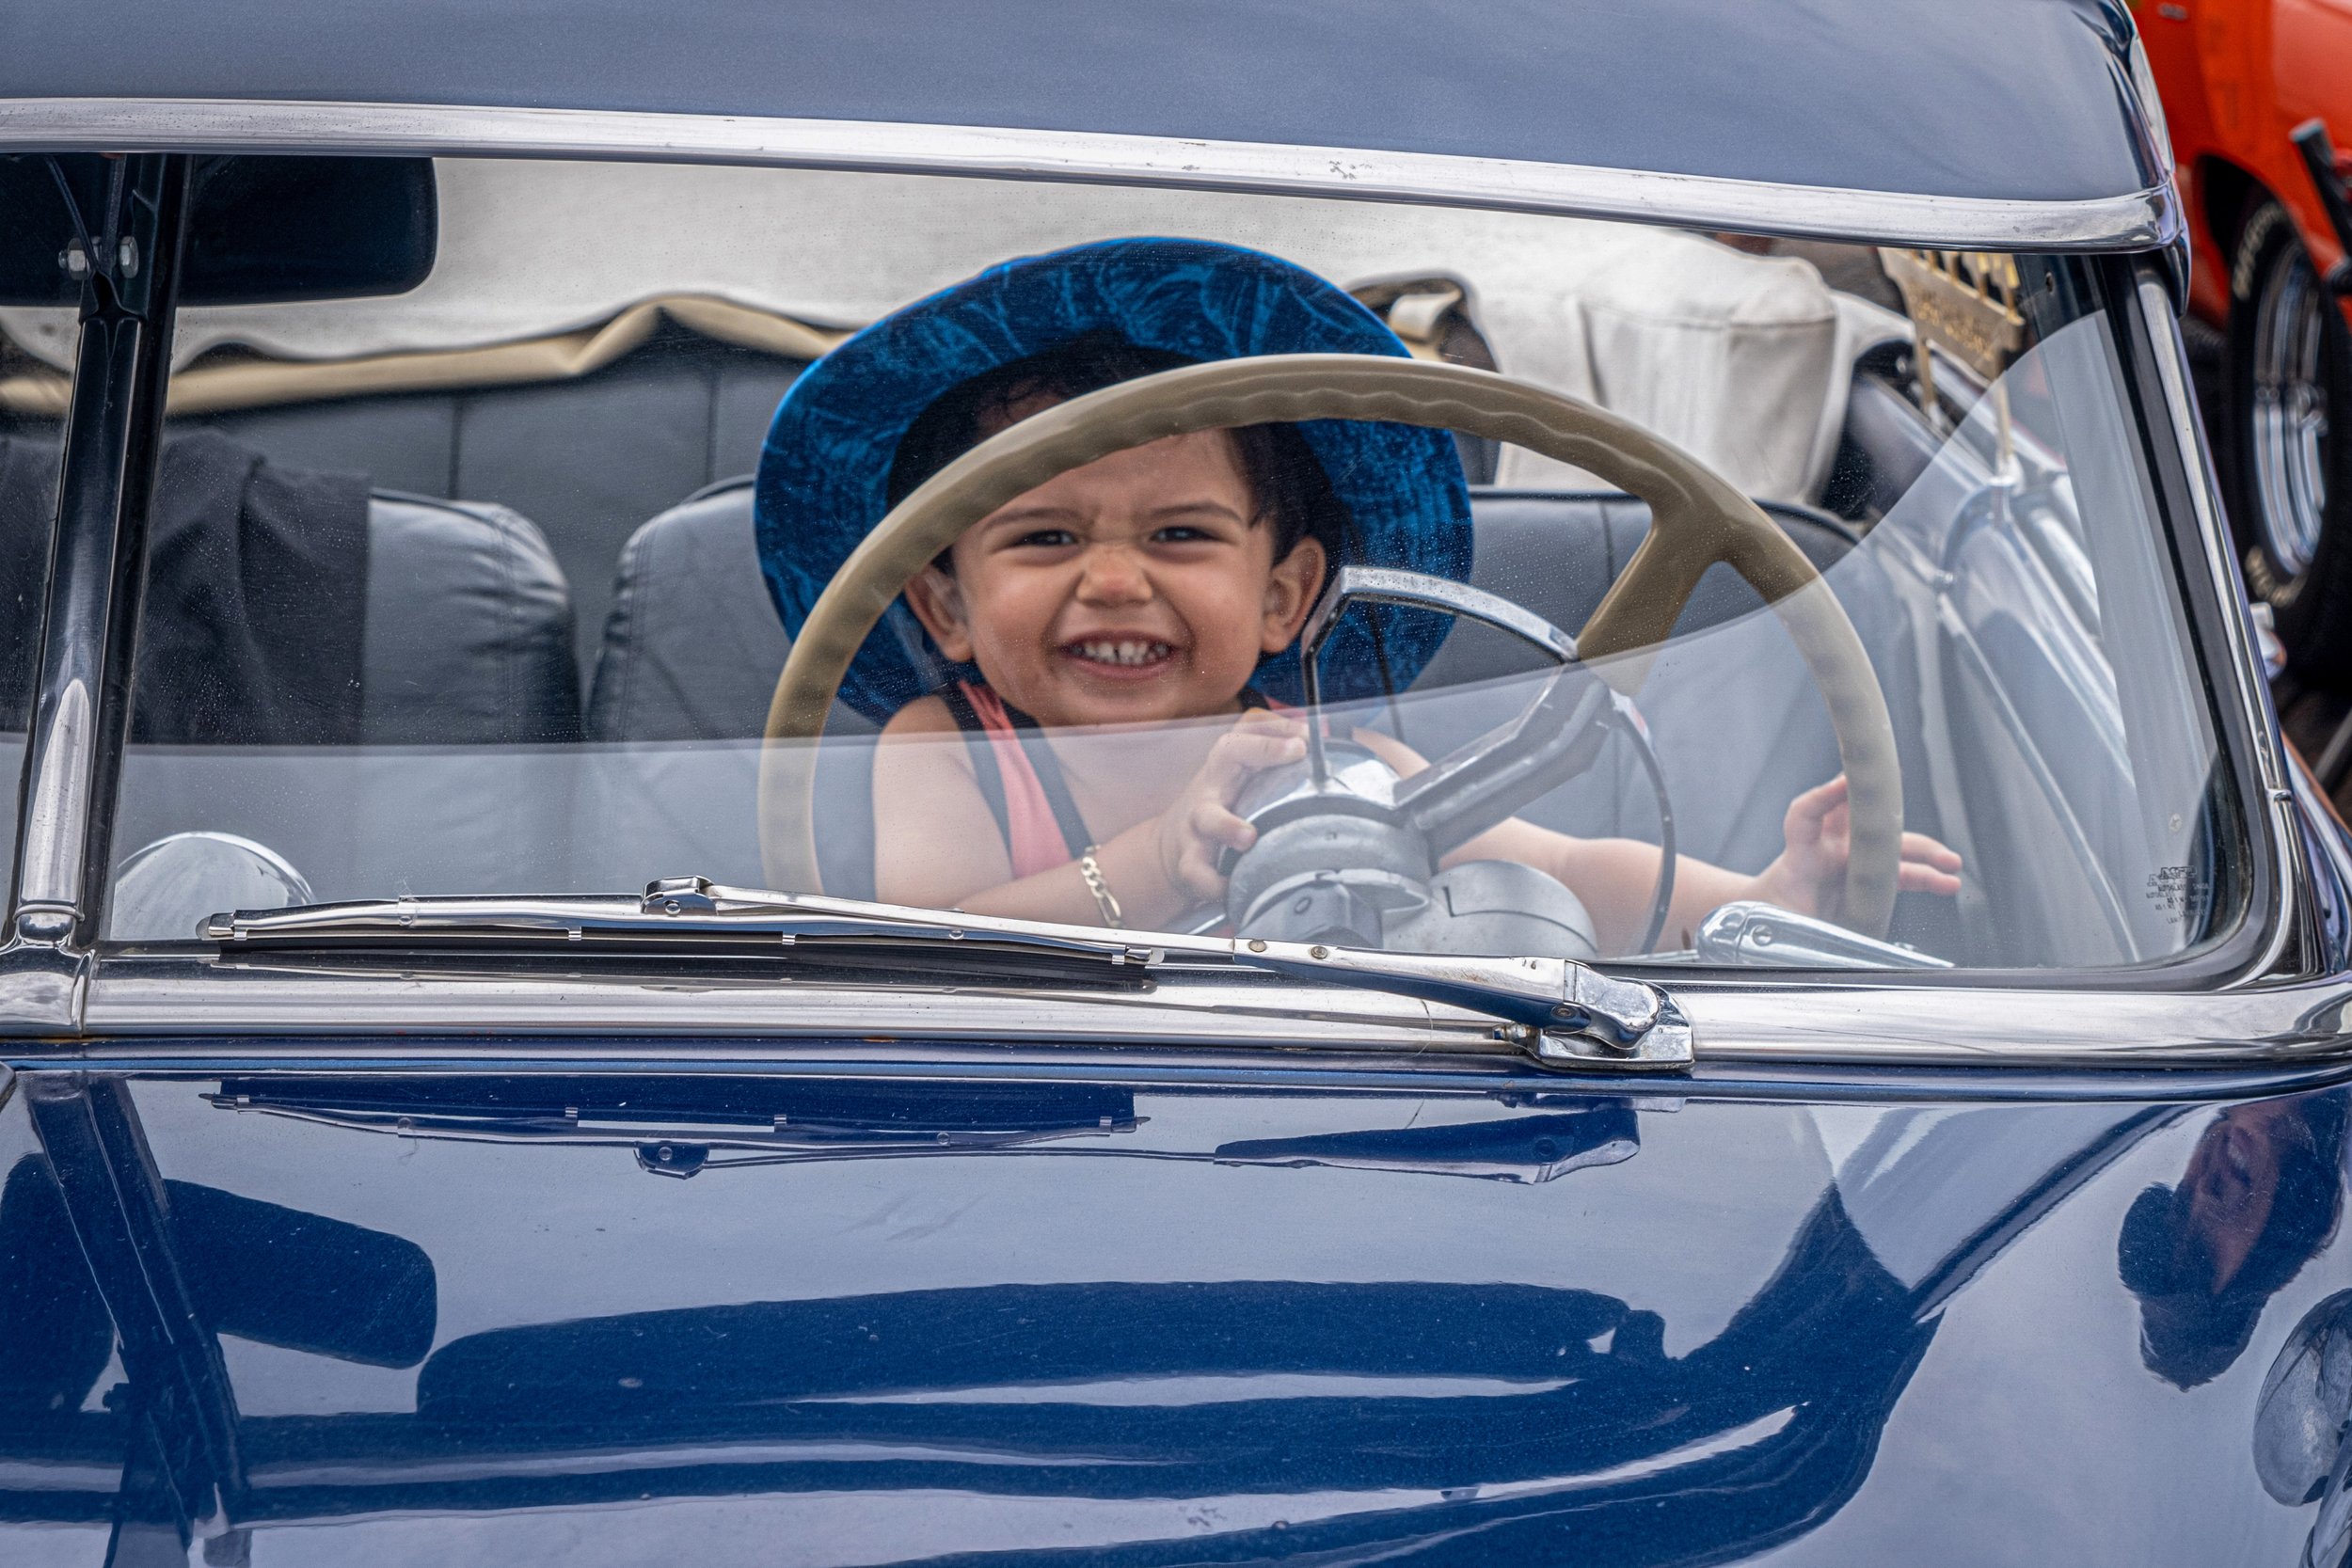  Young driver grins widely, as he takes the wheel of a classic car on Saturday. (Anna Sophia Moltke | The Corsair) 